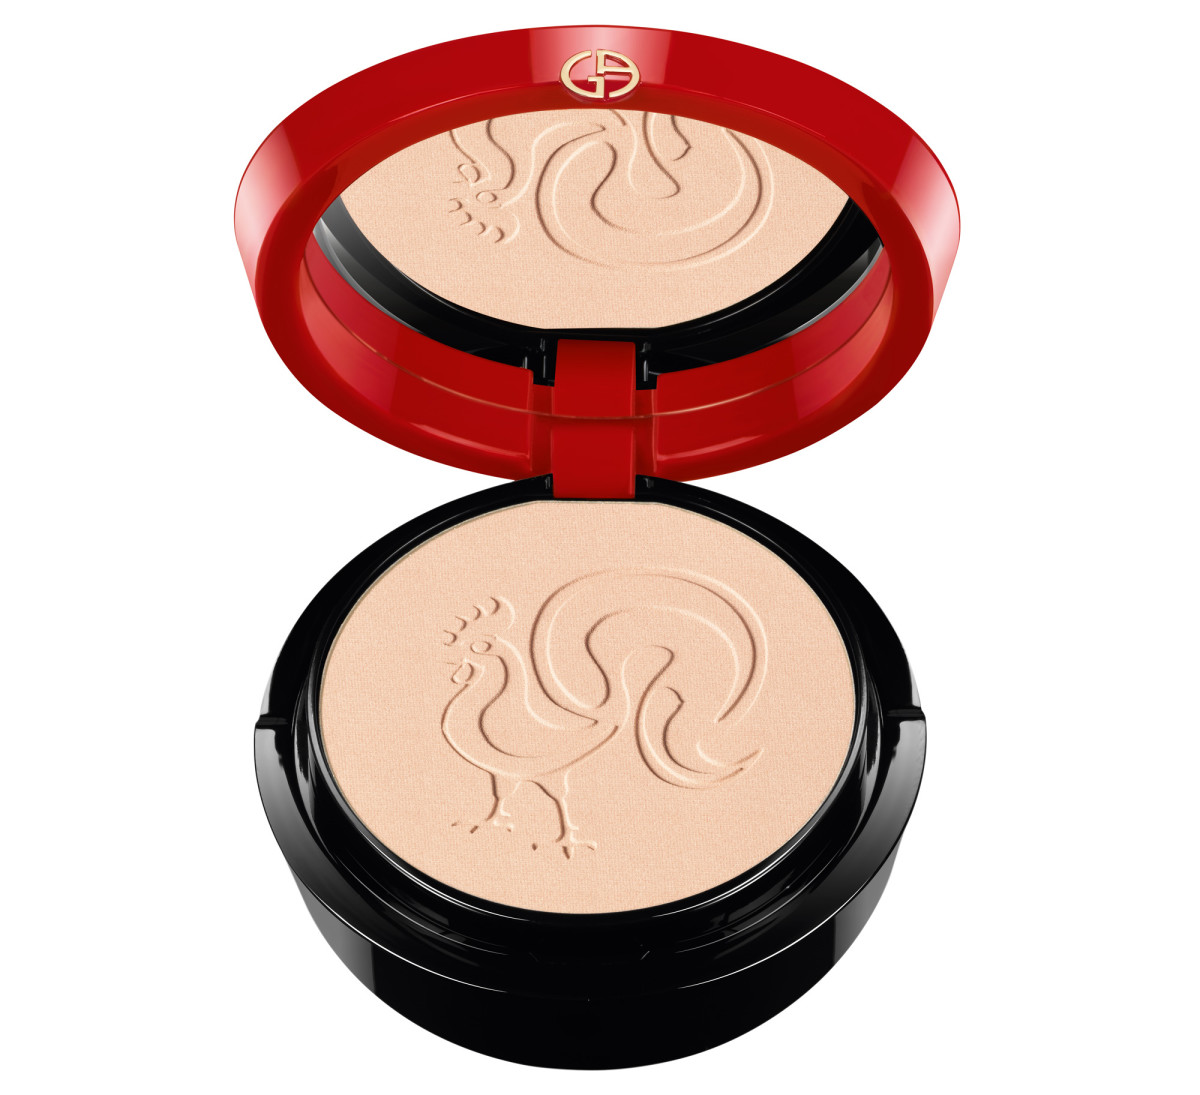 Giorgio Armani Chinese New Year Illuminating Palette, Year of the Fire Rooster, 2017